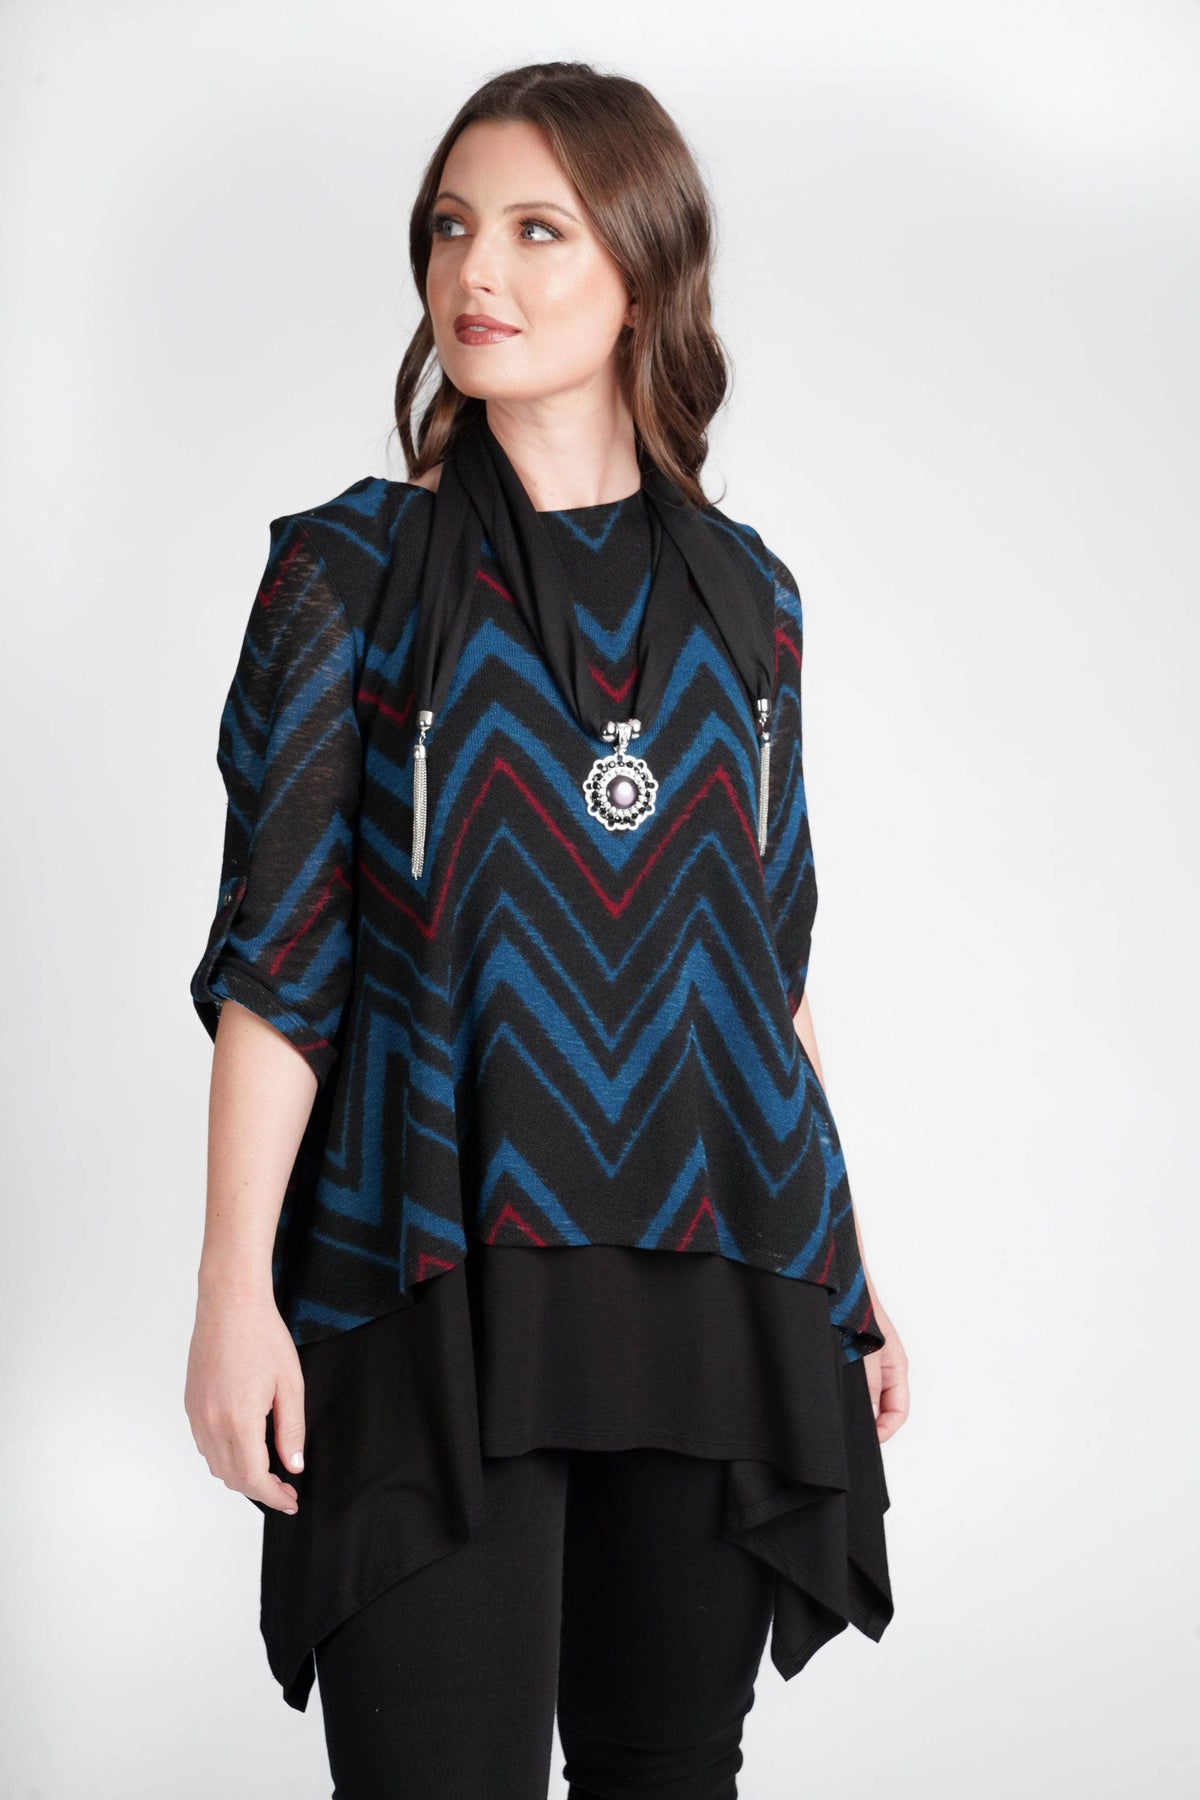 4P Top ZigZag Double Layered Top with Scarf